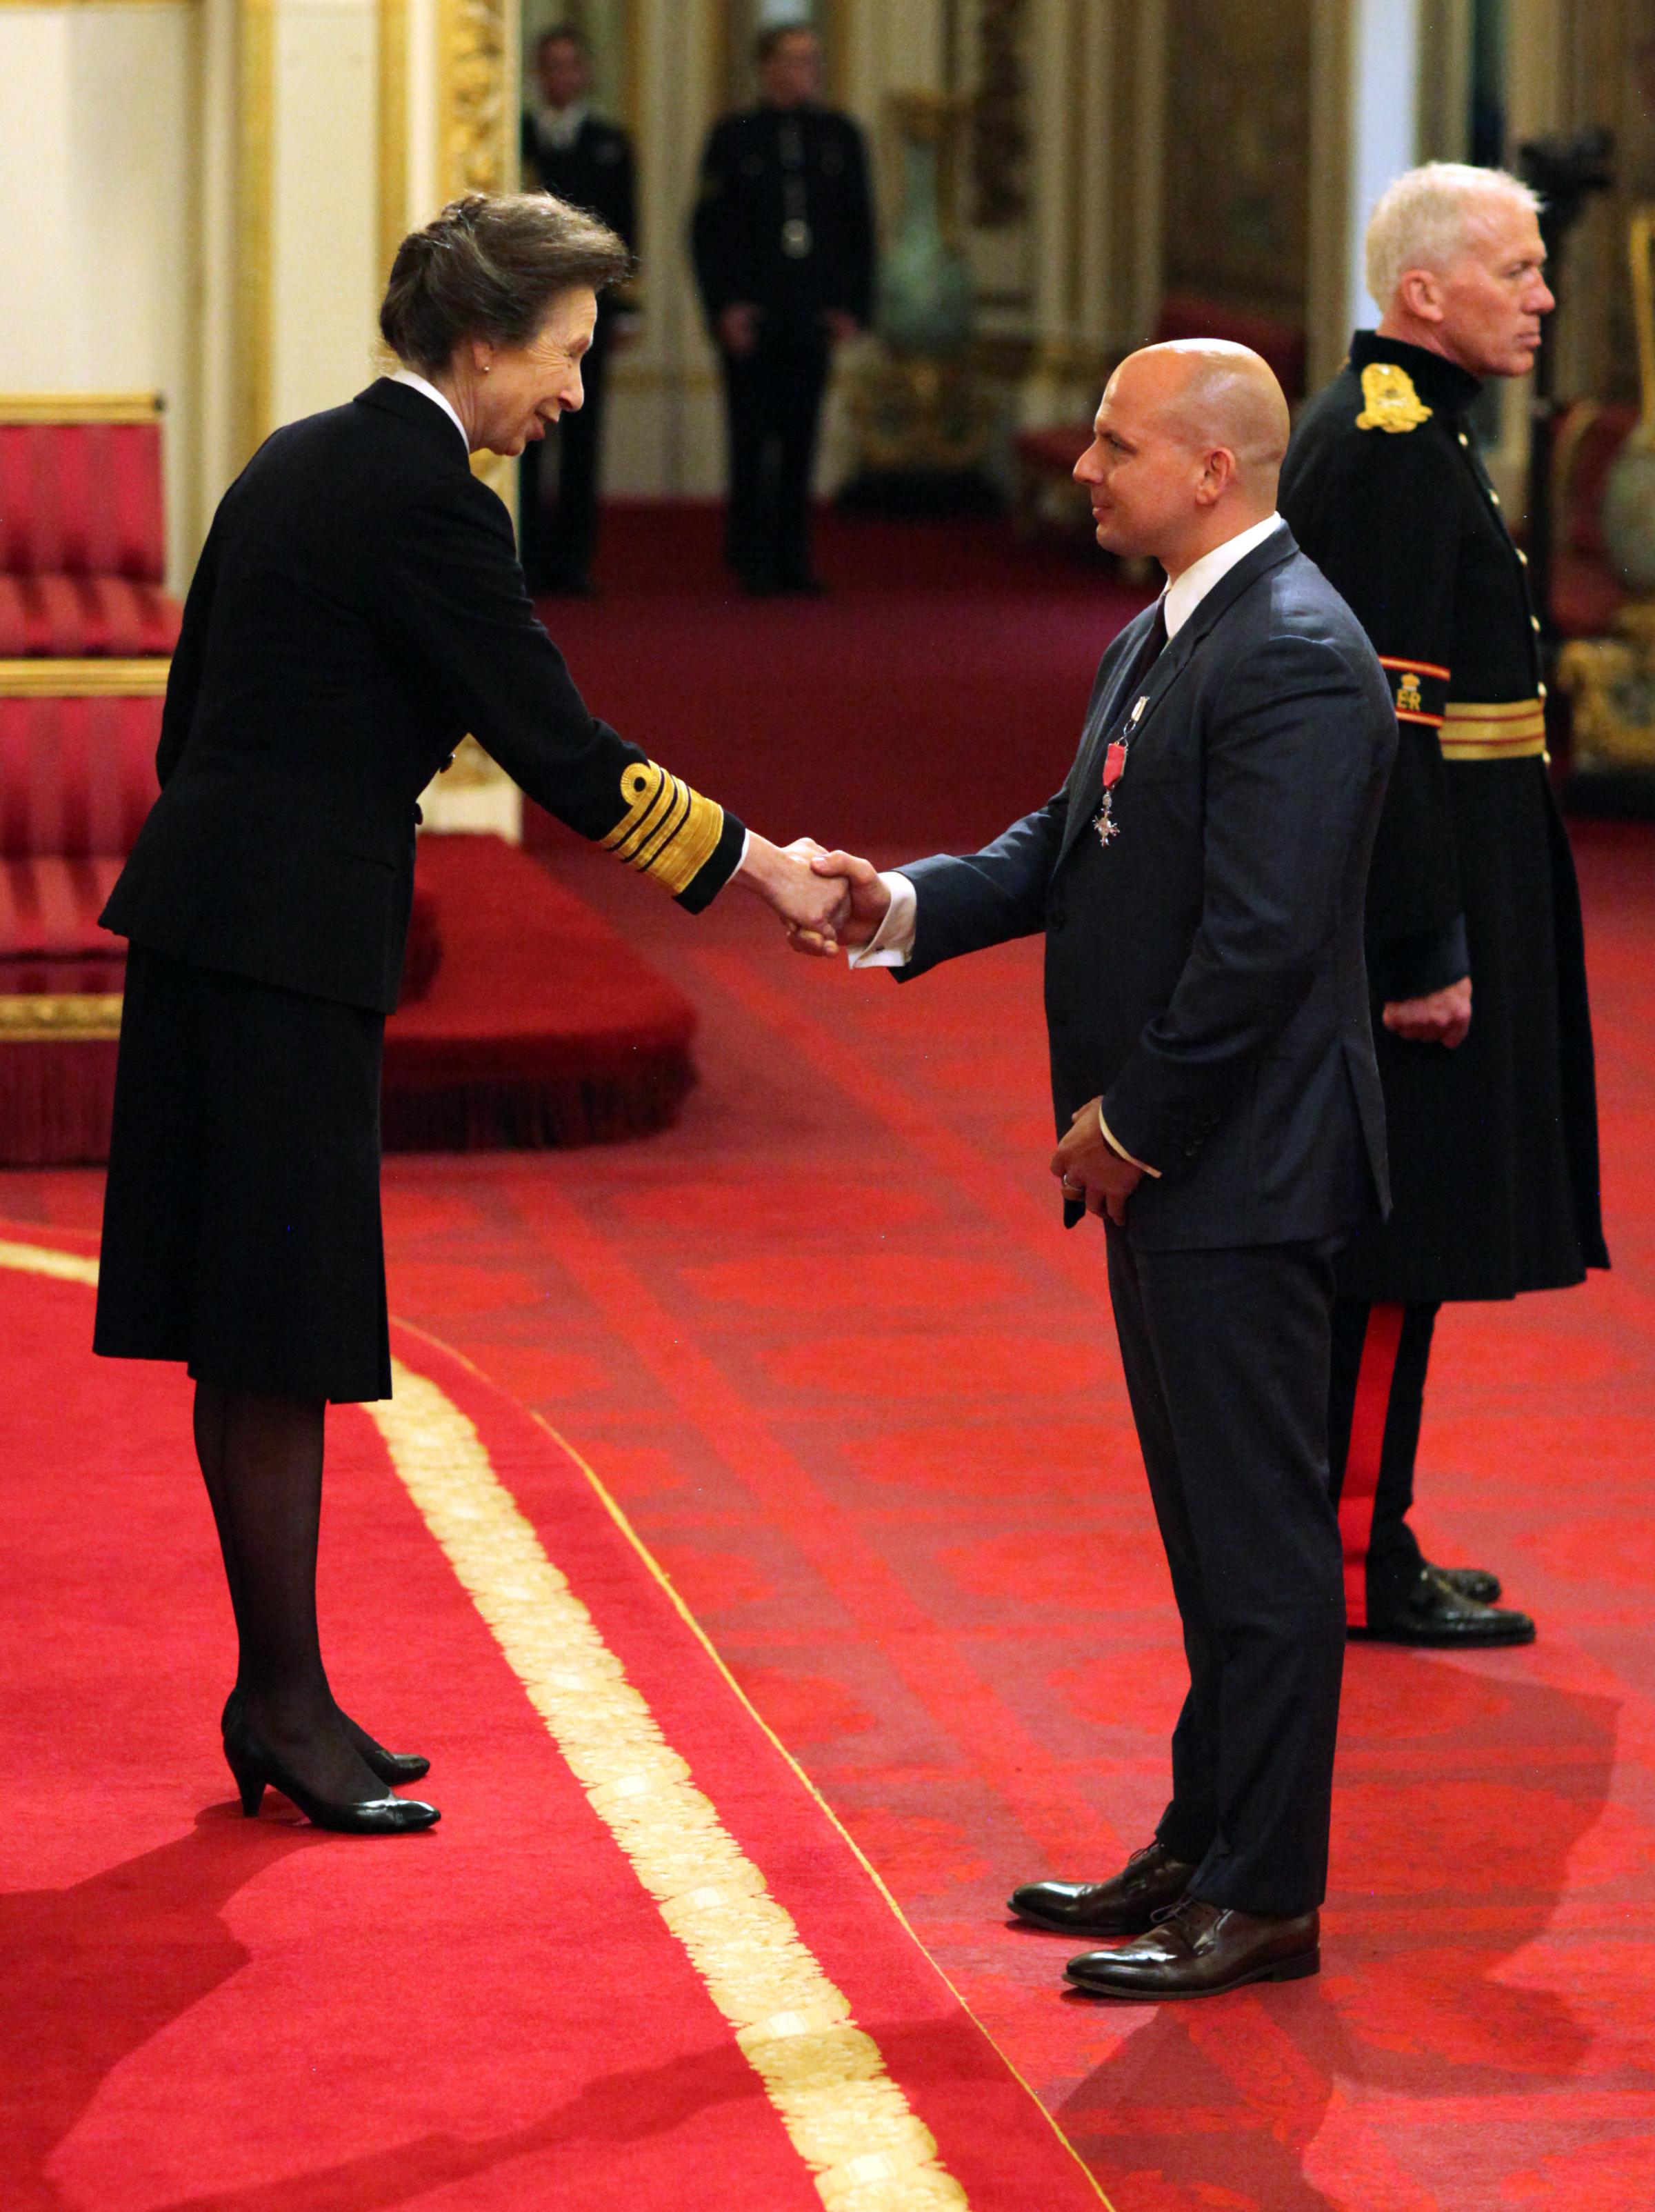 Coming face-to-face with royalty - South Essex Gymnastics Club coach Scott Hann visited Buckingham Palace and was made an MBE by Princess Anne in October 2017